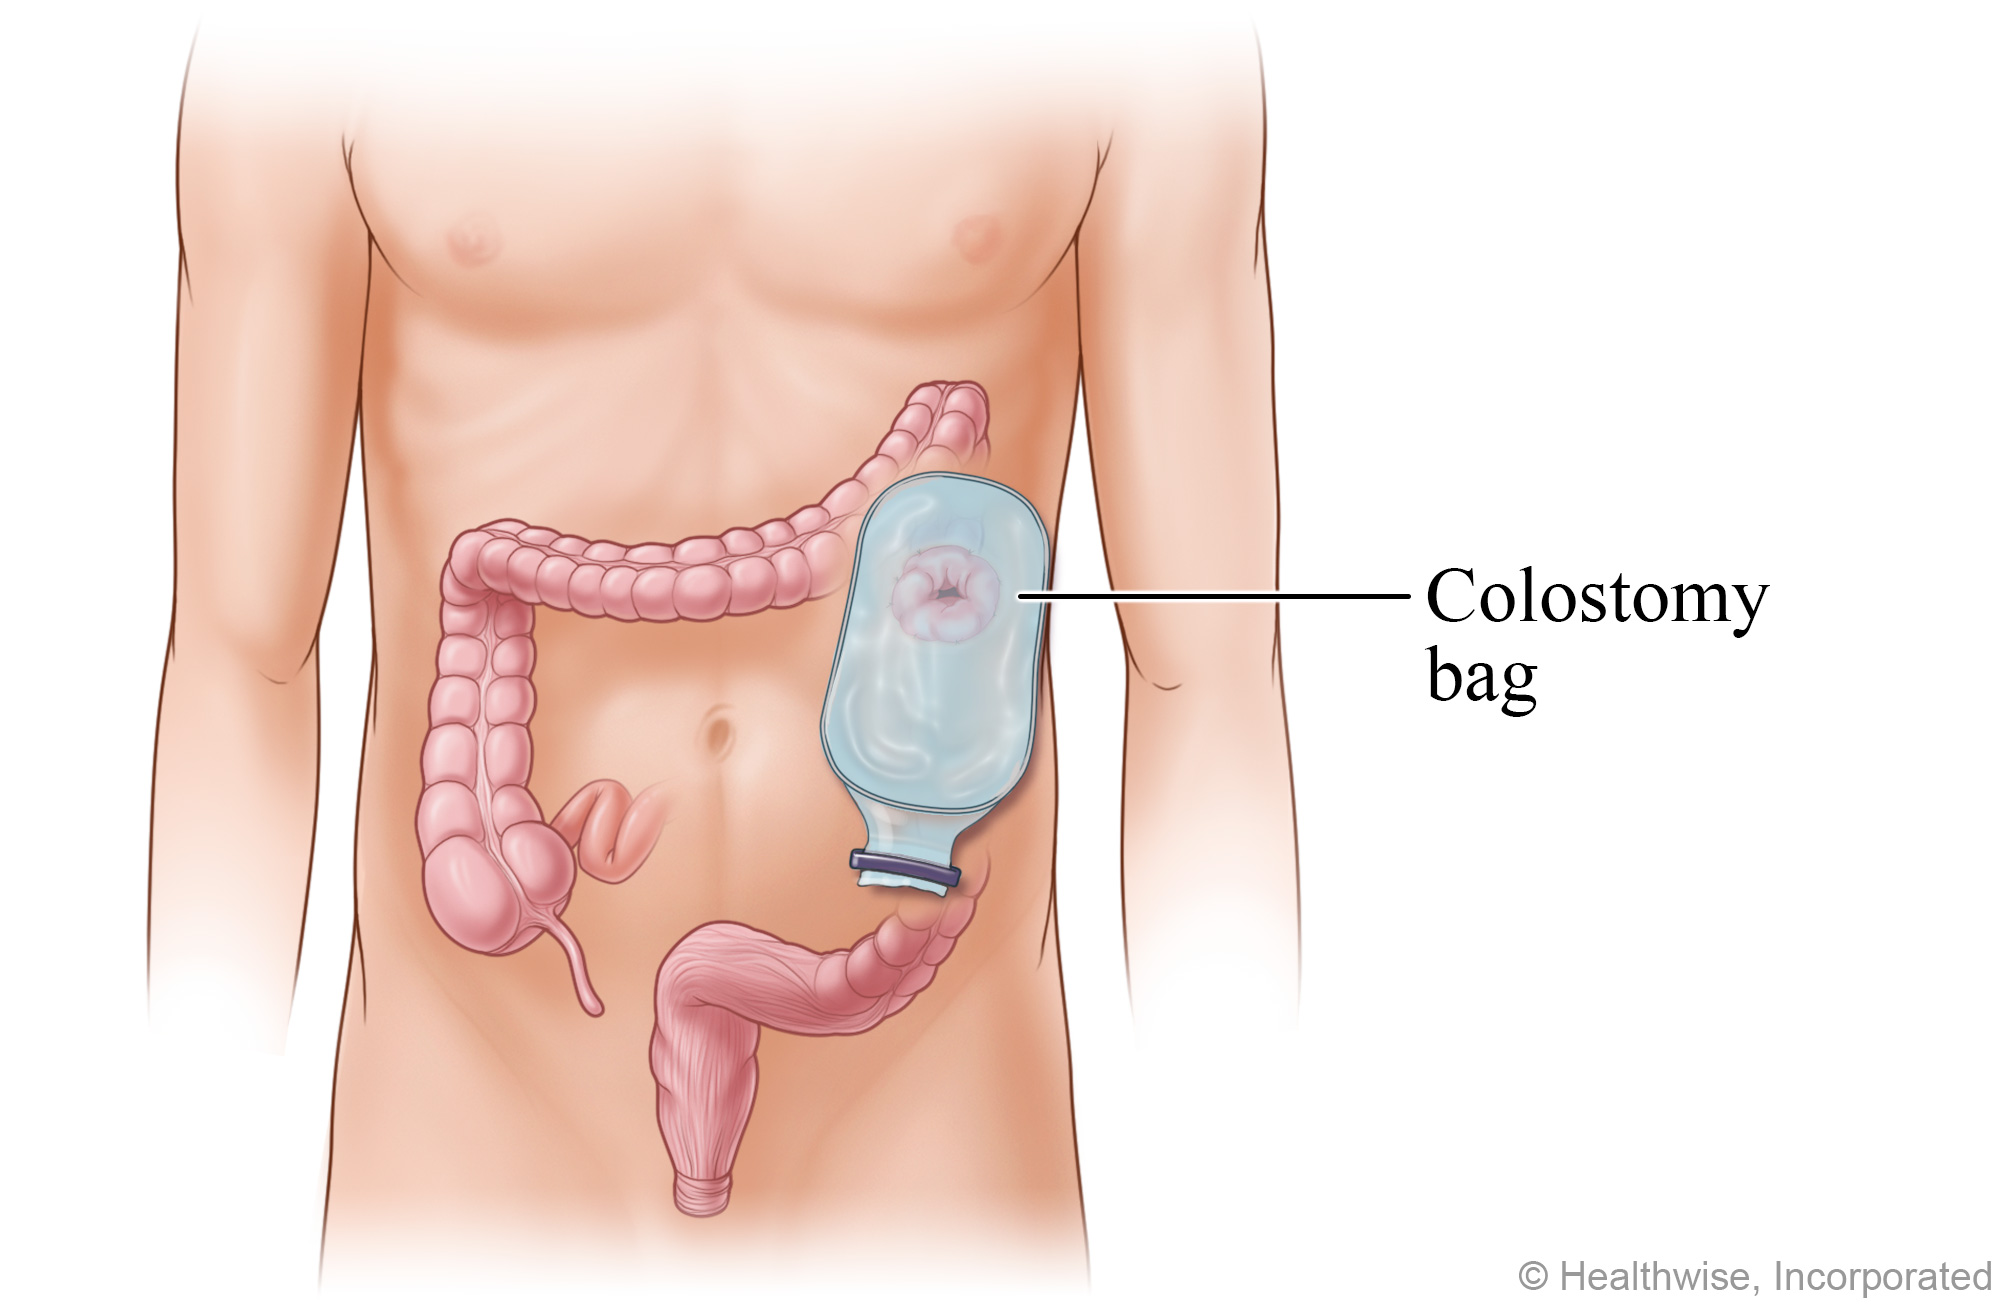 A colostomy bag positioned on the stoma